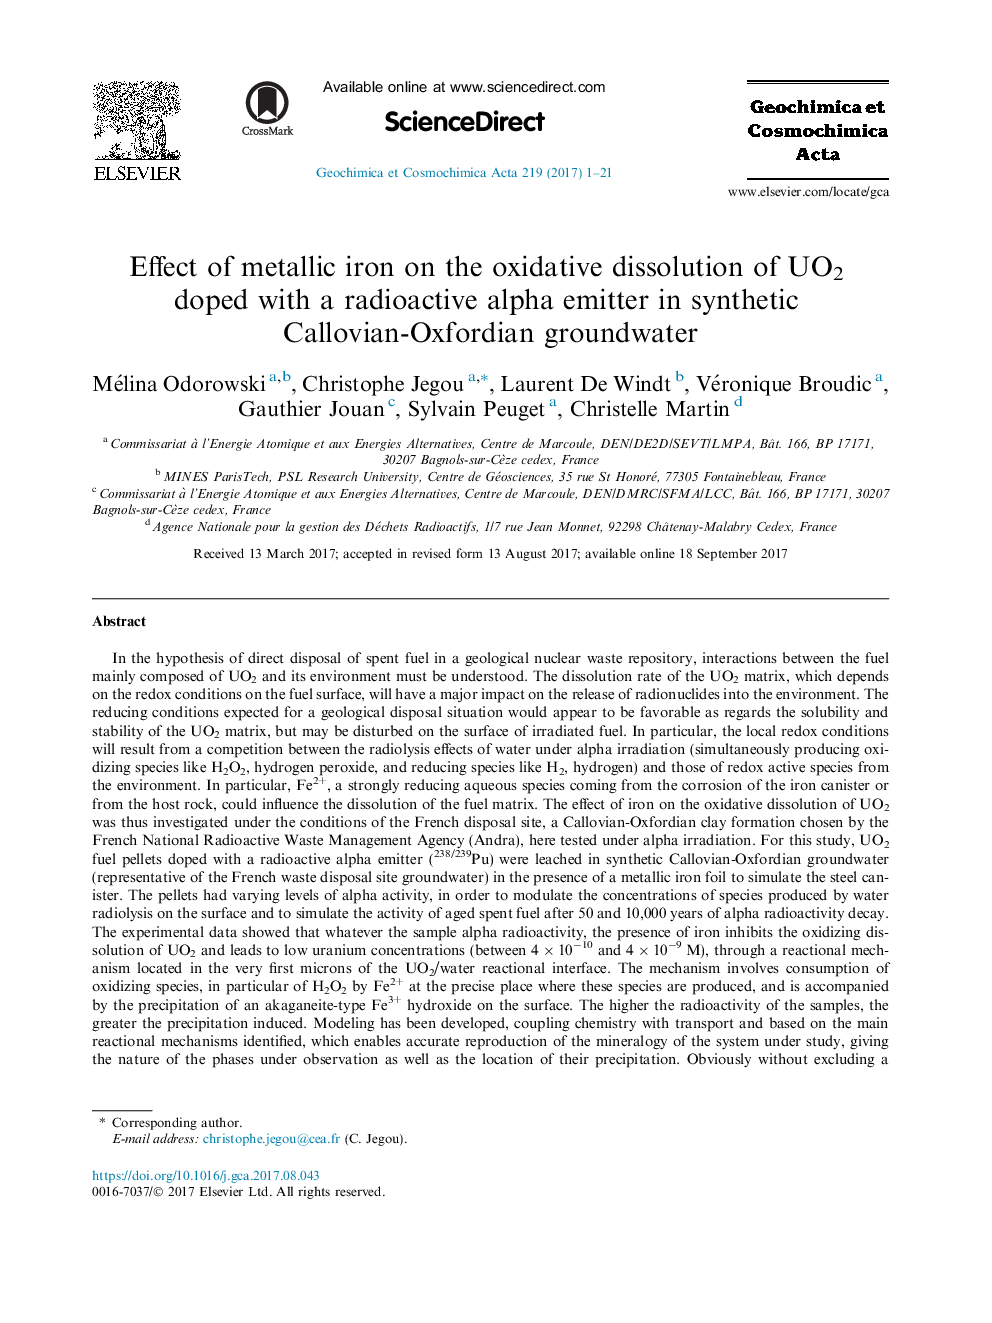 Effect of metallic iron on the oxidative dissolution of UO2 doped with a radioactive alpha emitter in synthetic Callovian-Oxfordian groundwater